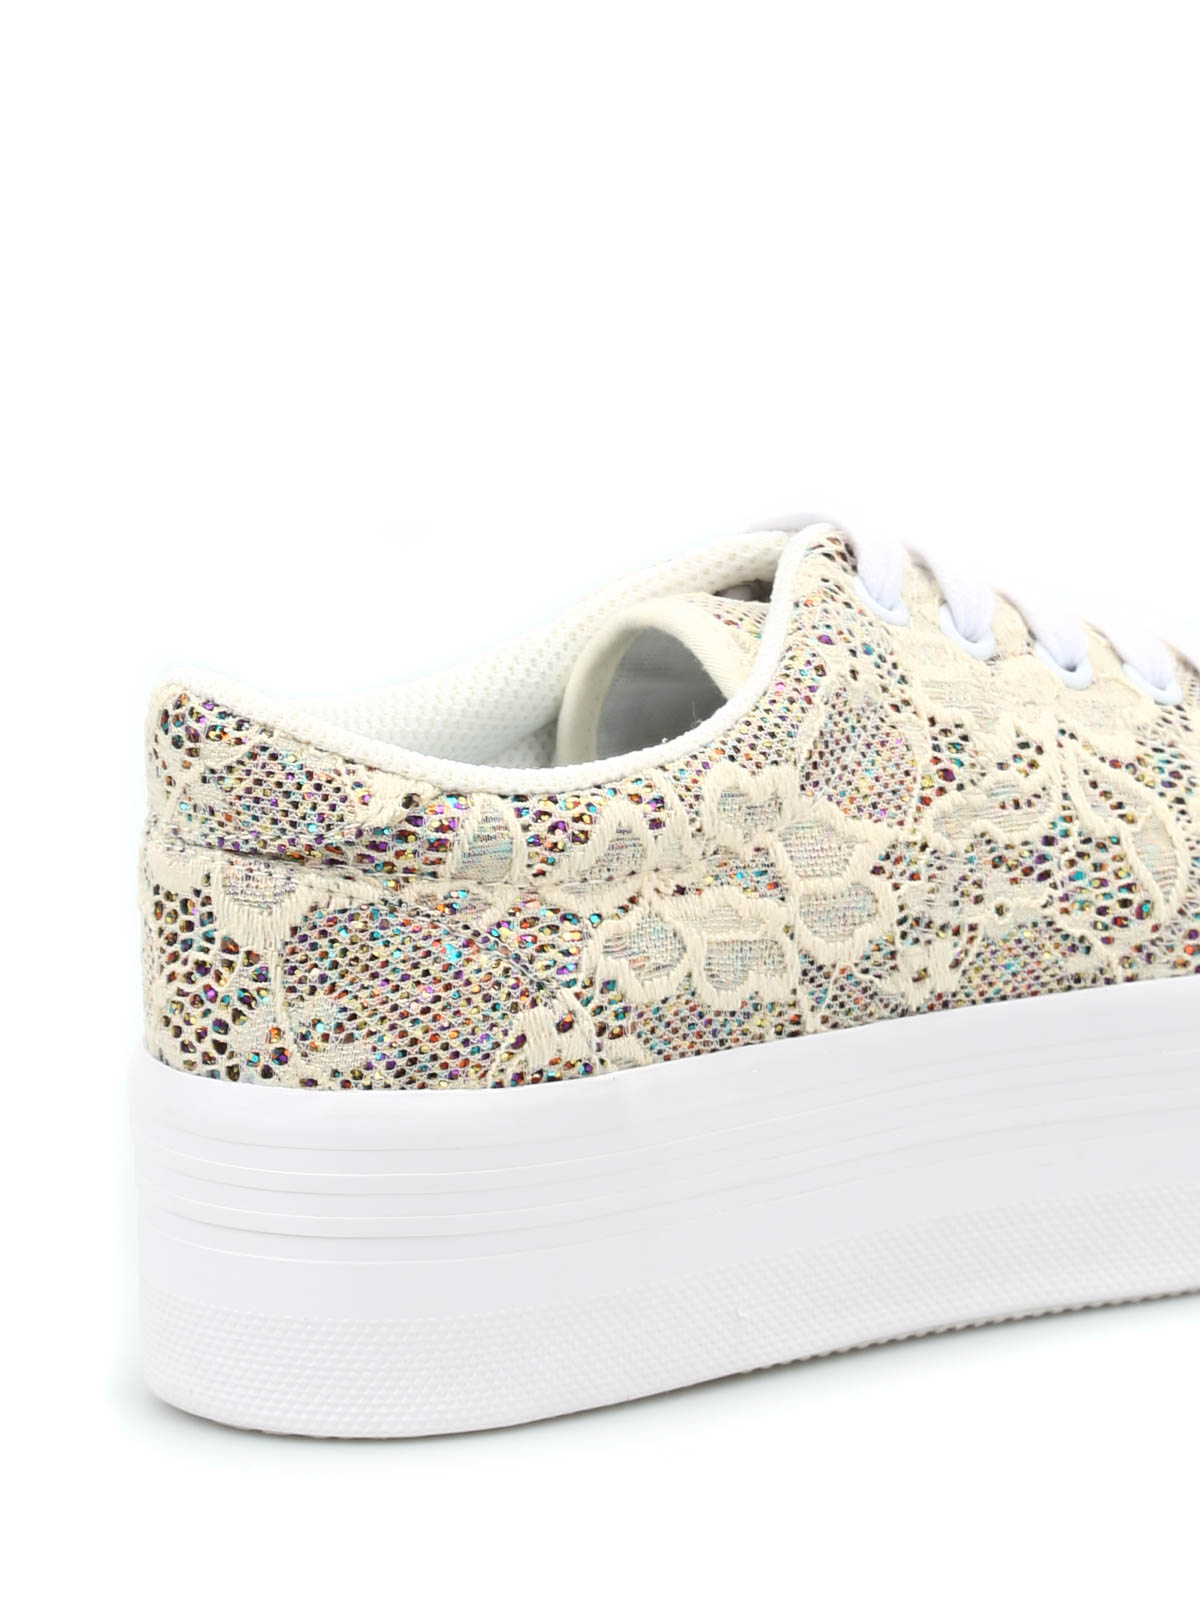 Jeffrey Campbell - Zomg lace trainers - ZOMGLACE